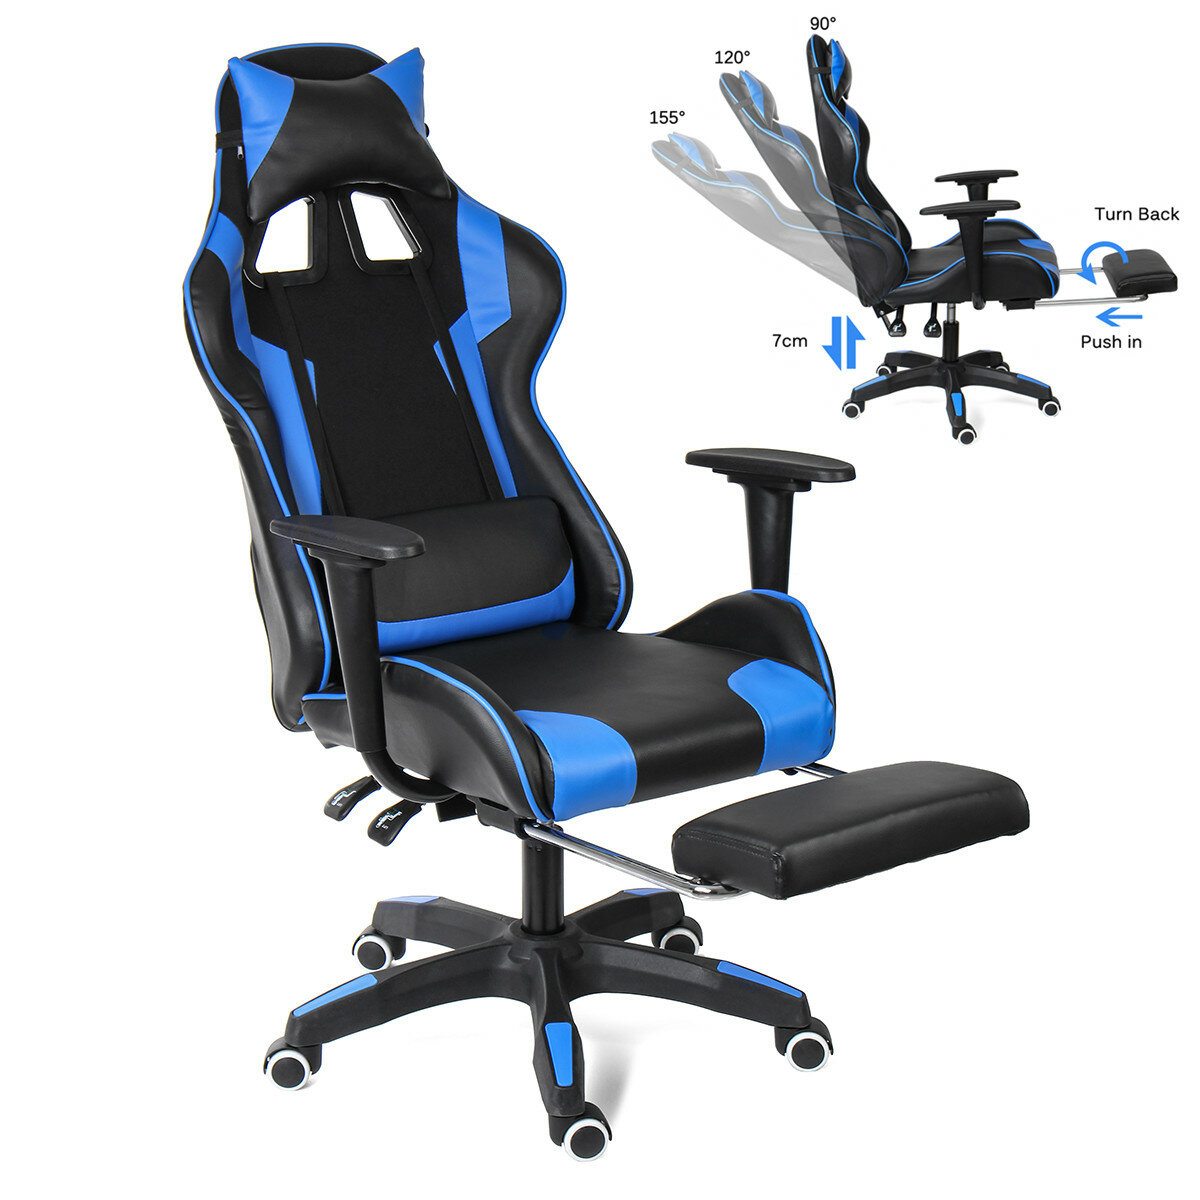 

Ergonomic High Back Racing Gaming Chair Recliner Computer Laptop Desk PU Leather Seat Office Chair with Footrest